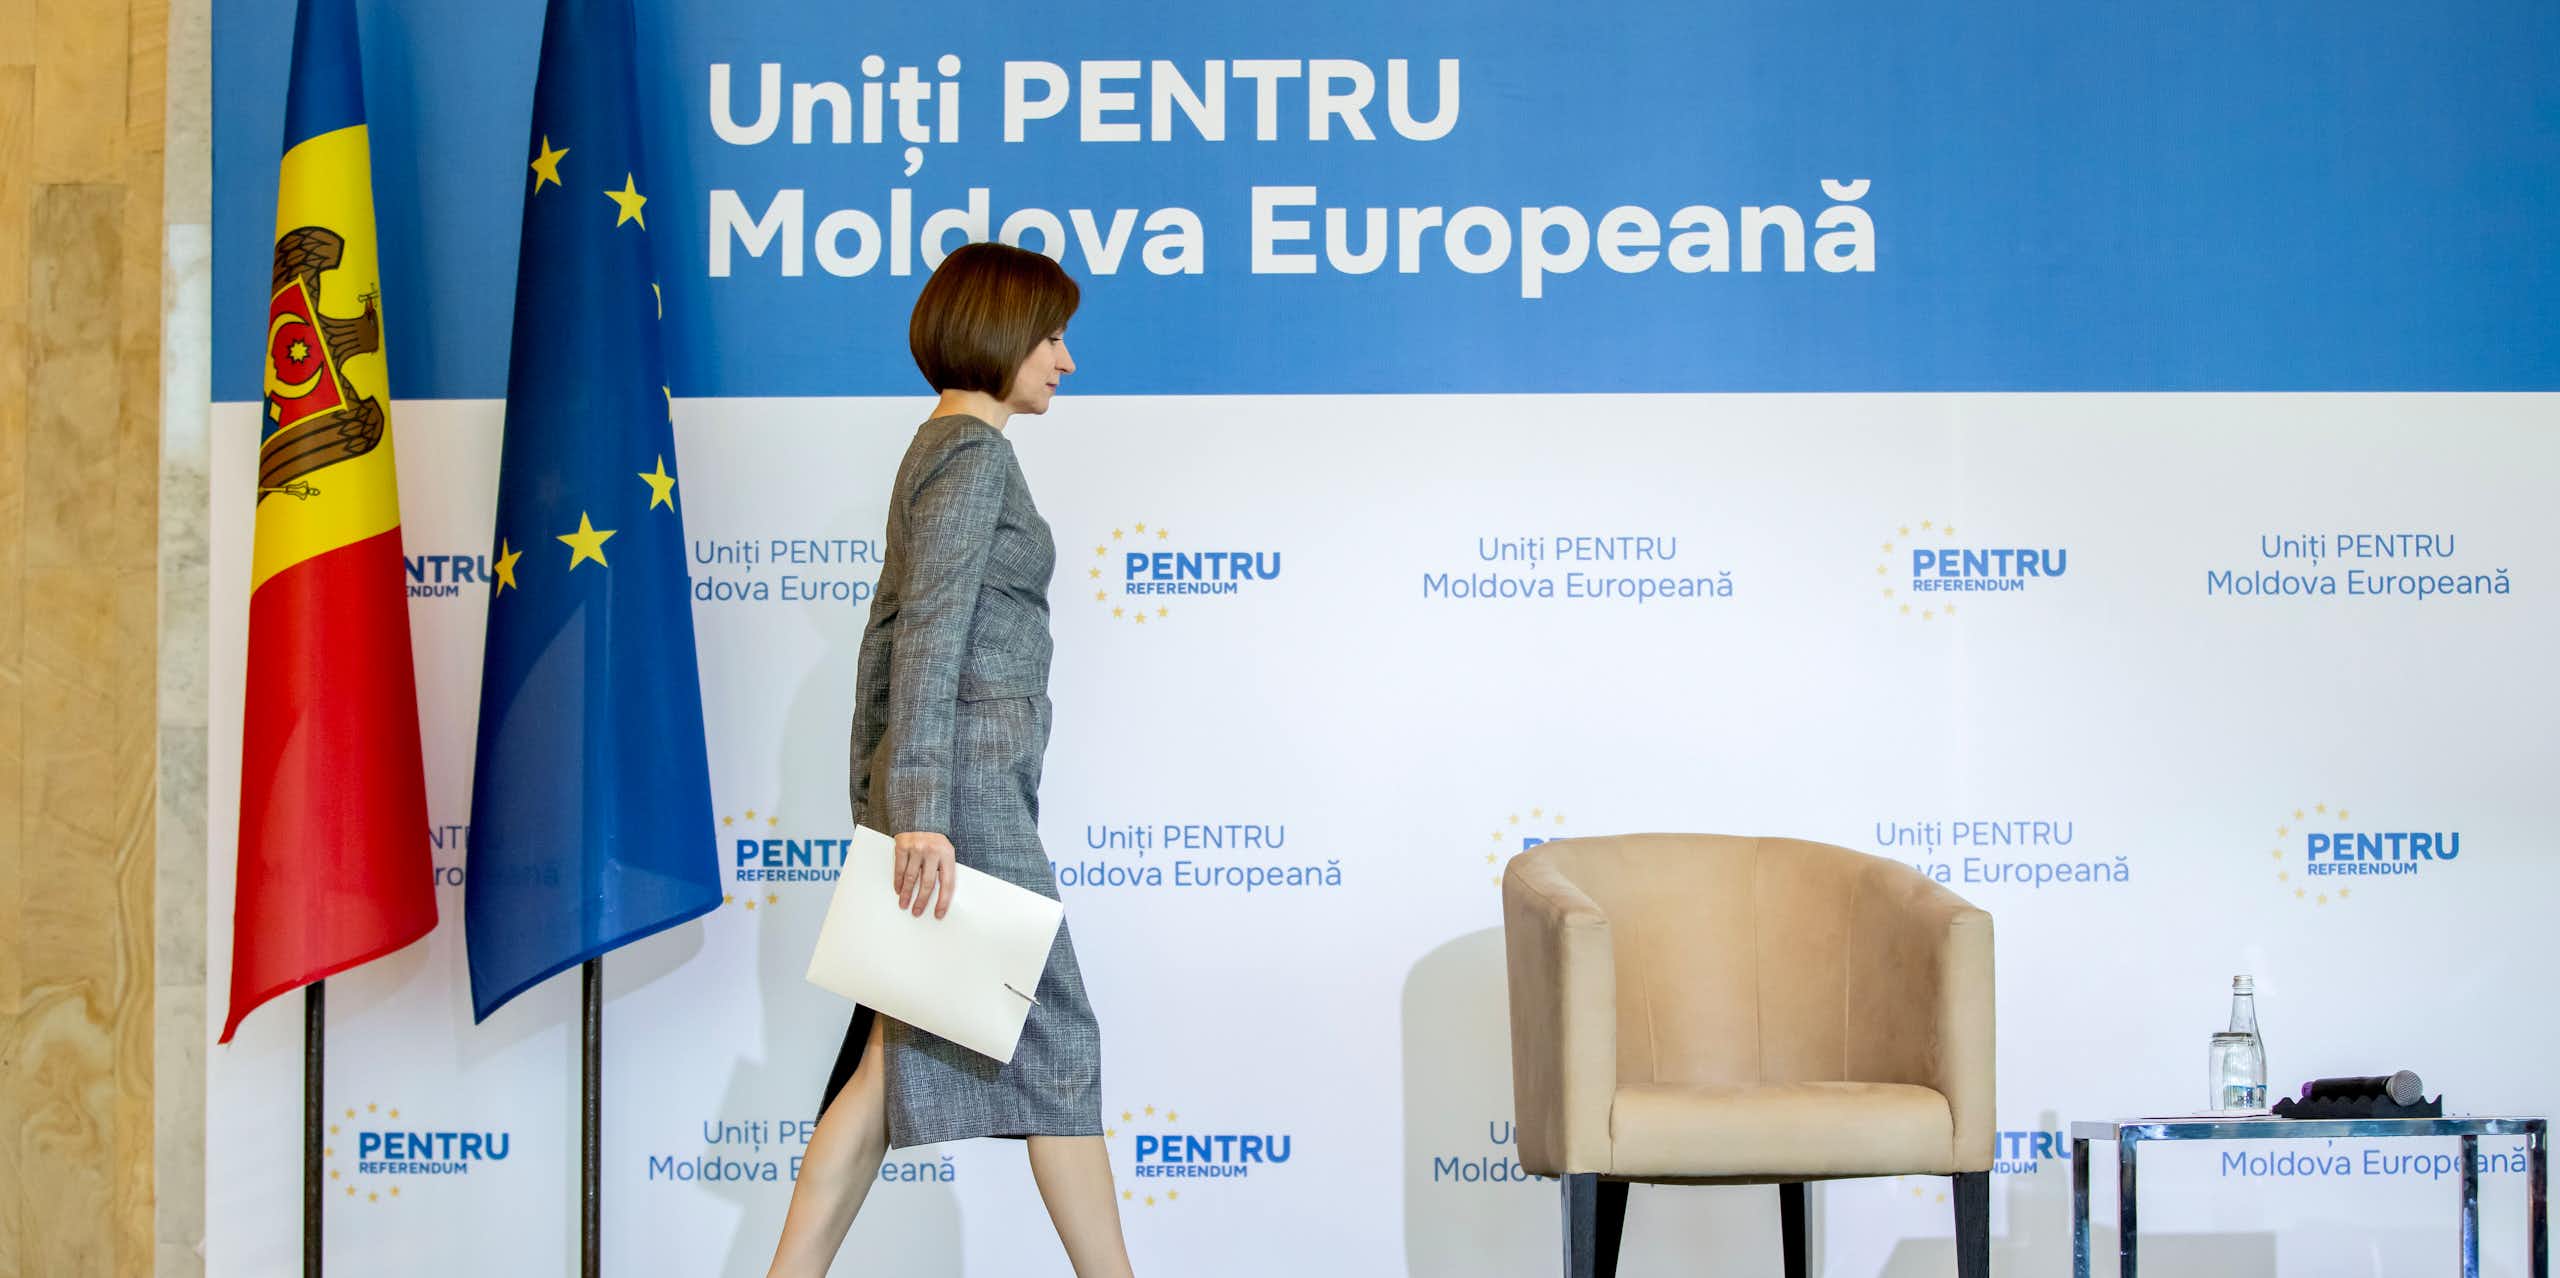 Moldovan president Maia Sandu.walks across a stage in front of Moldovan and EU flags.